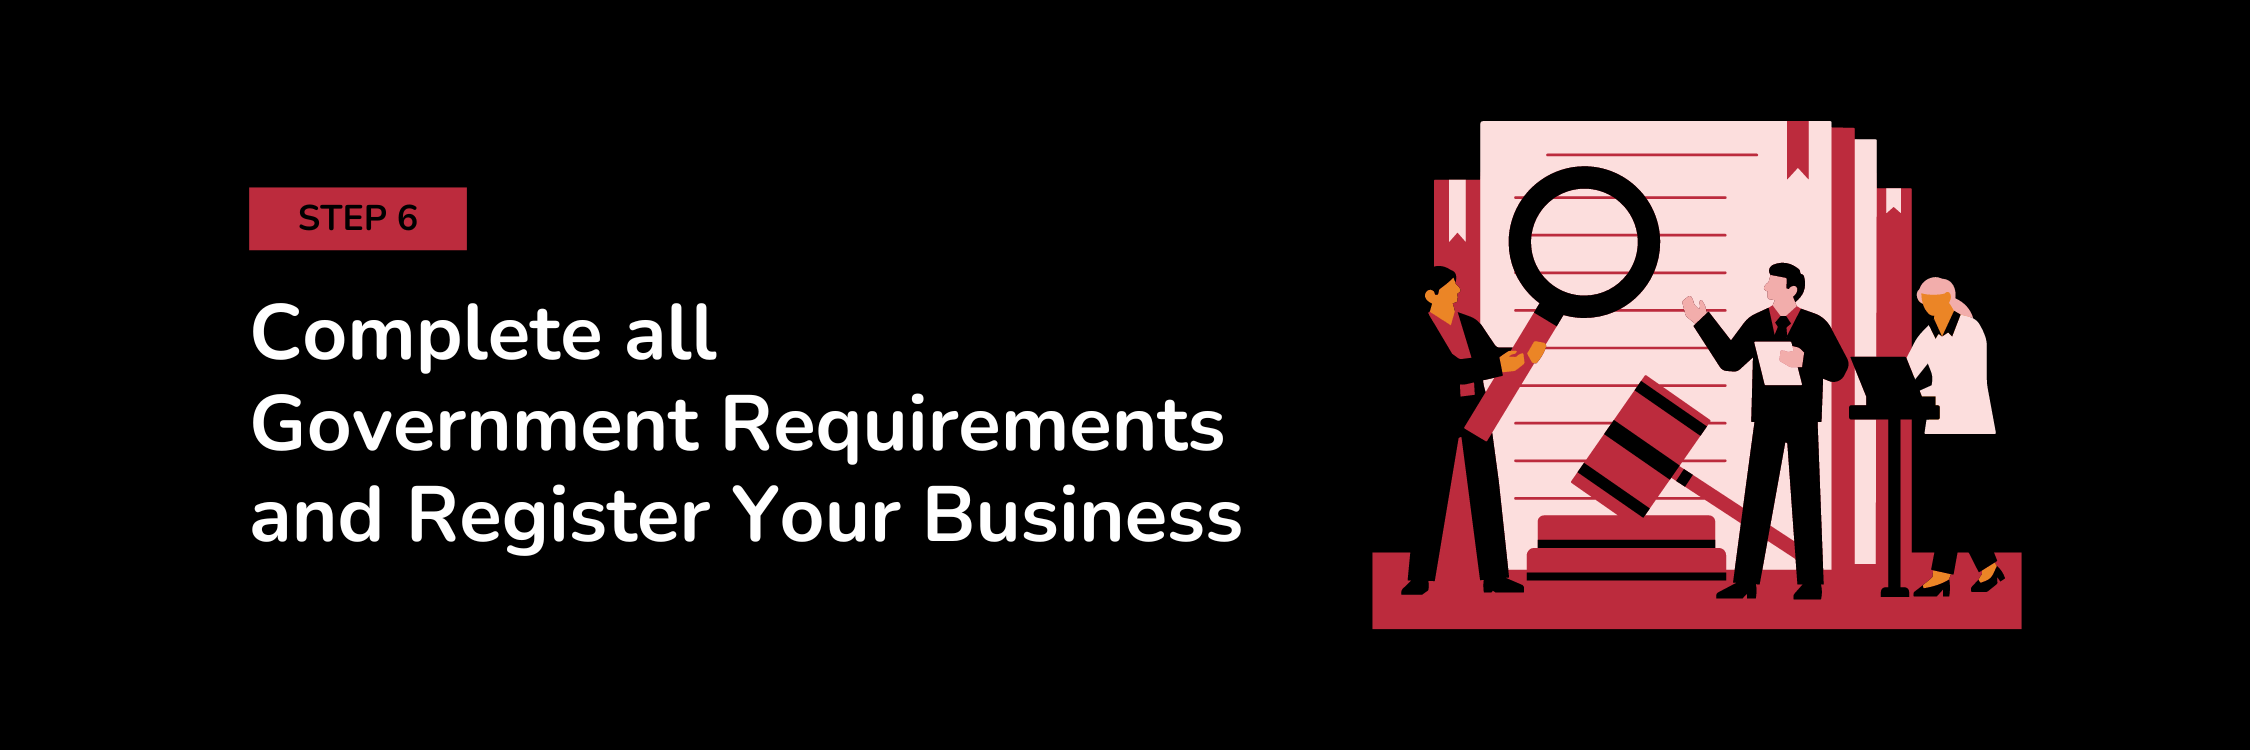 Step 6: Complete All Government Requirements and Register Your Business